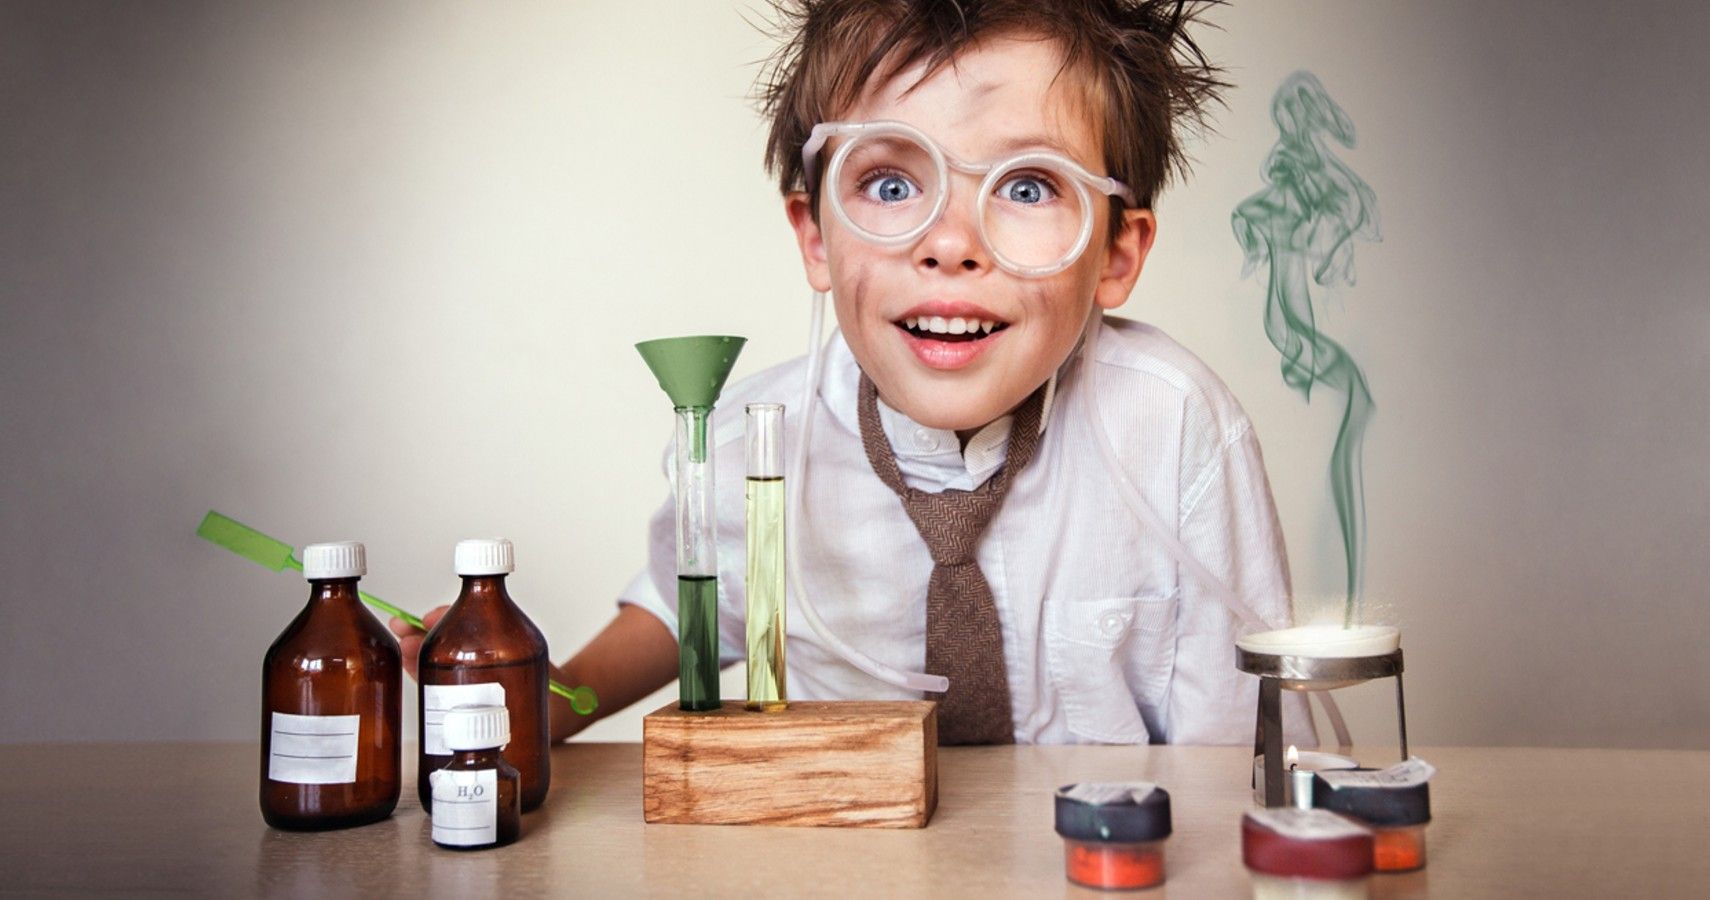 kid science experiments